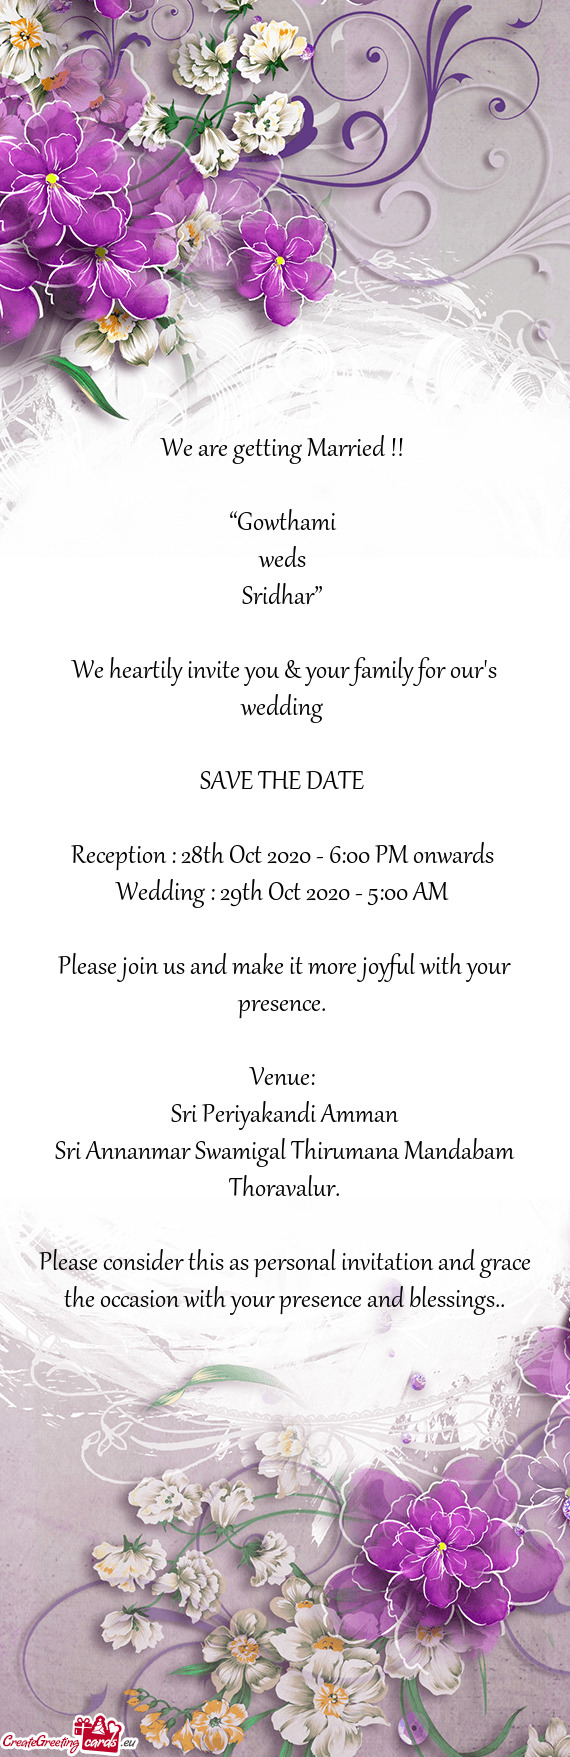 Reception : 28th Oct 2020 - 6:00 PM onwards